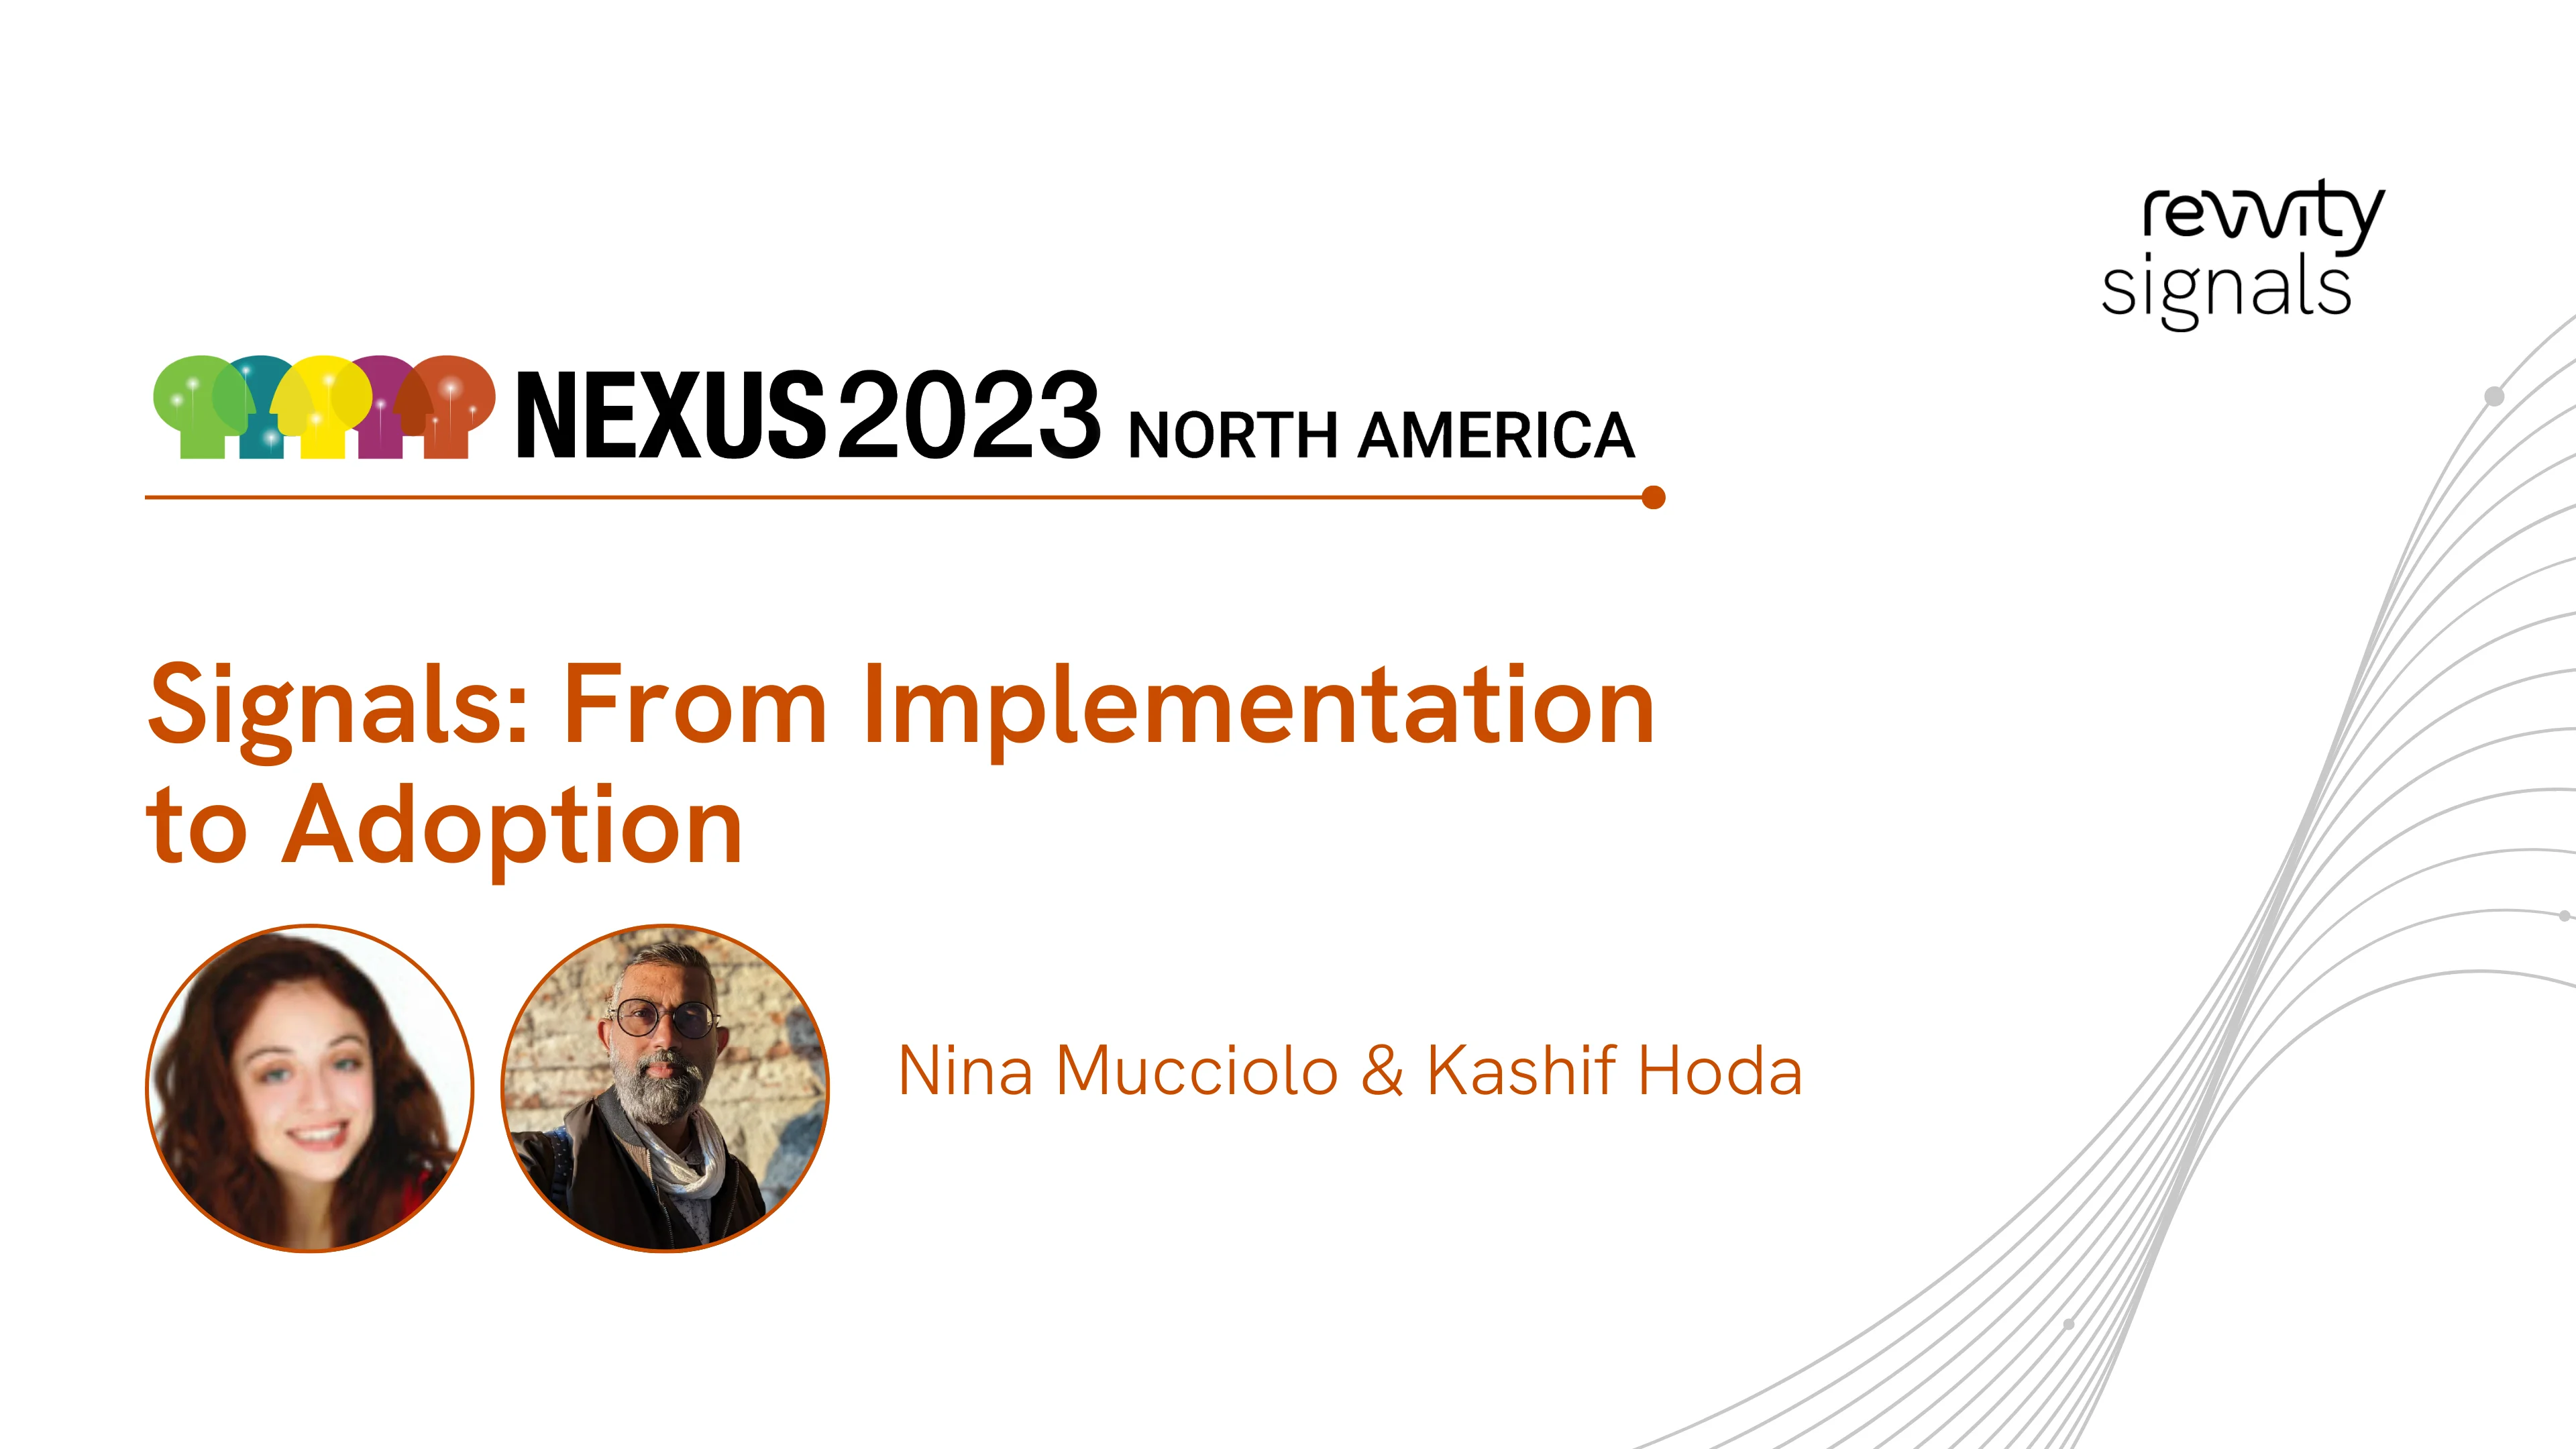 Watch Day 1, NA NEXUS 2023 - Signals: From Implementation to Adoption on Vimeo.